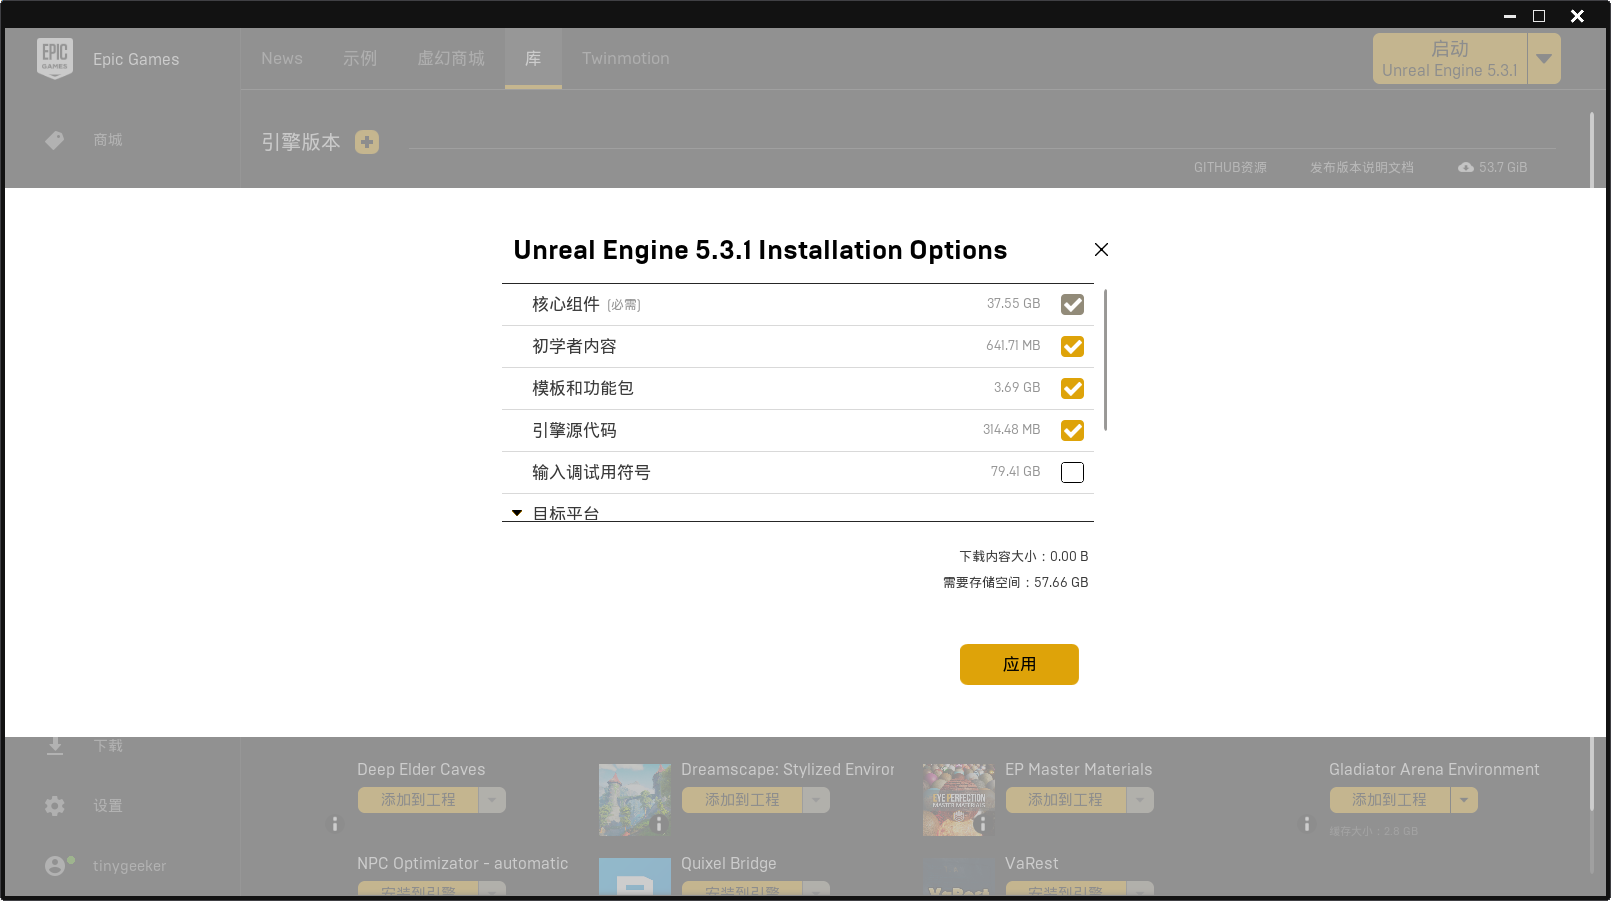 Select installation options